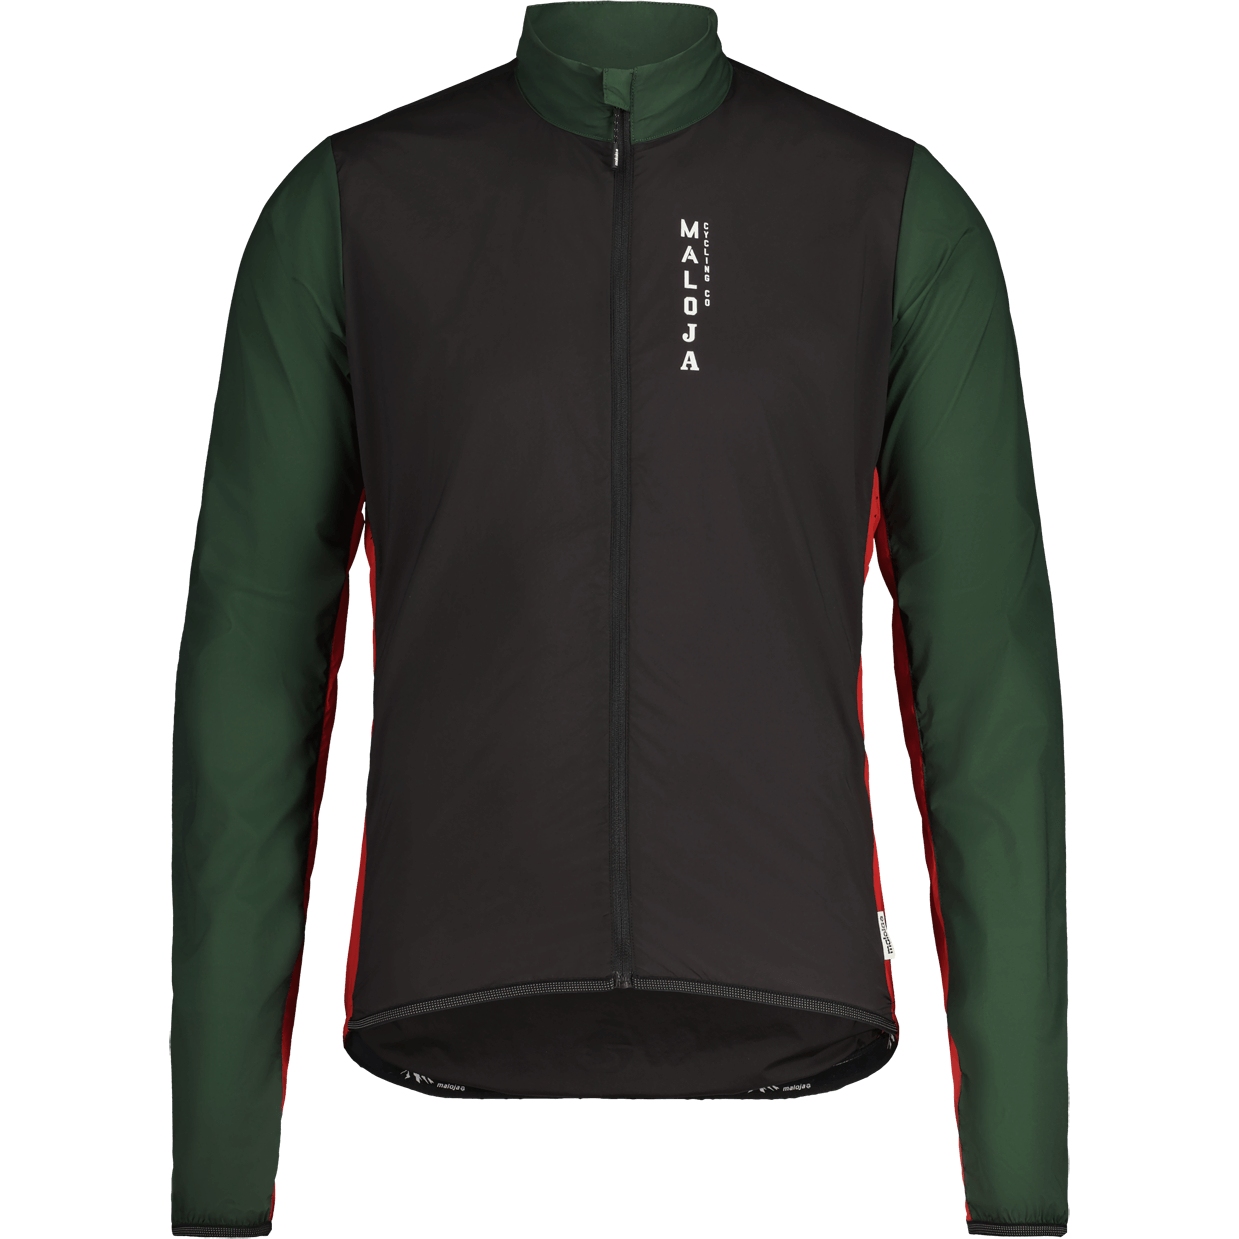 Picture of Maloja MaxM. Cycle Jacket - moonless multi 0821